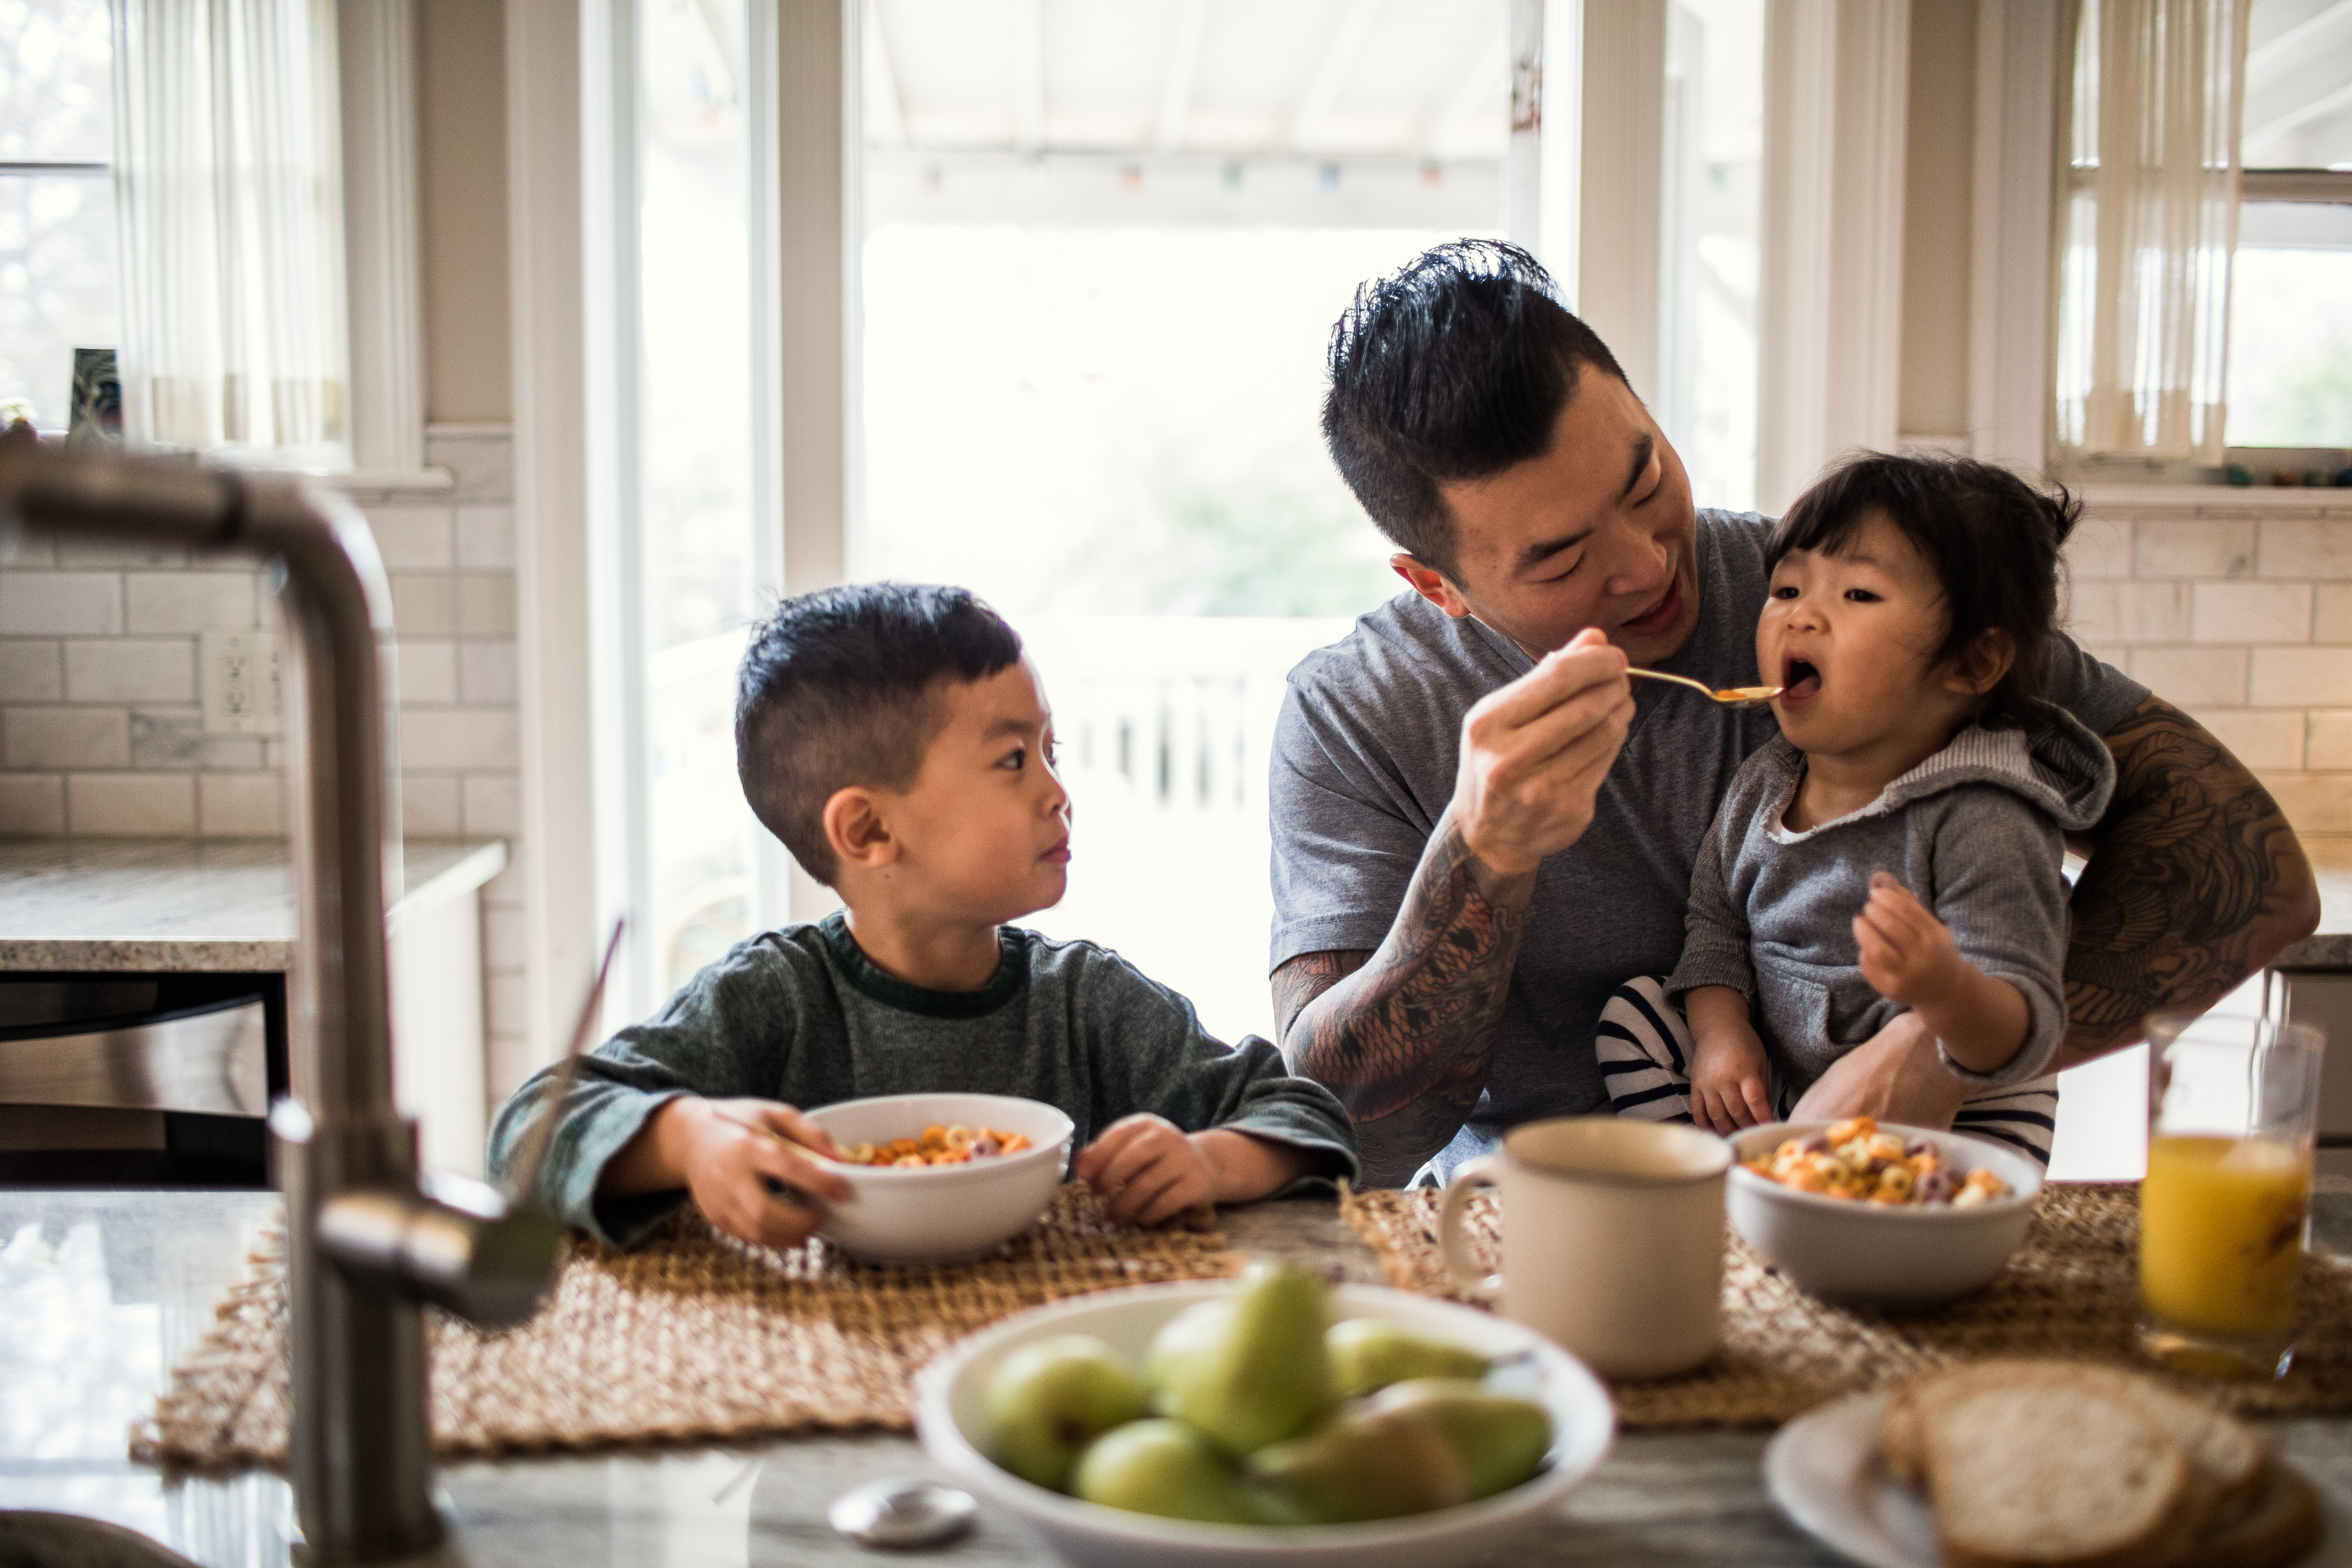 A father feeding his children at the table in their home.